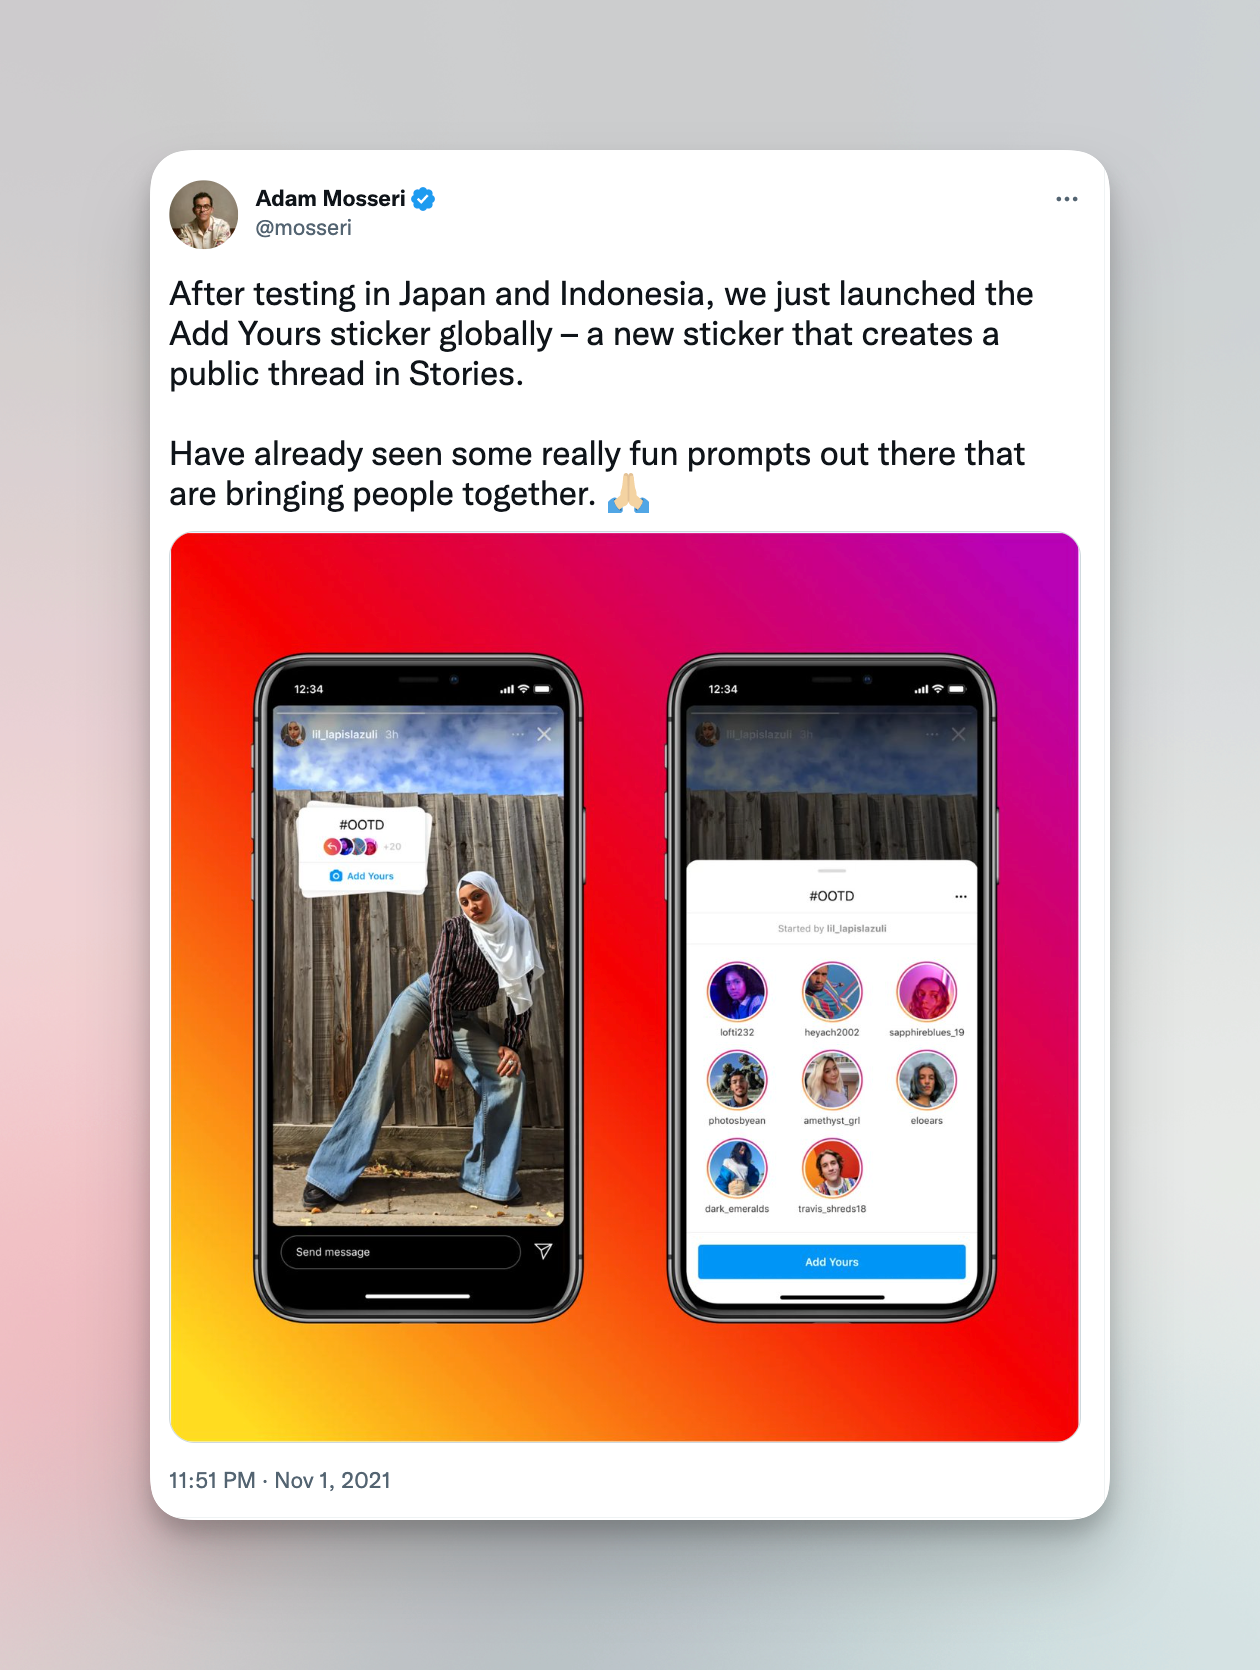 Remote.tools shows a screenshot from the head of Instagram defining add yours sticker feature as a way to create a public thread